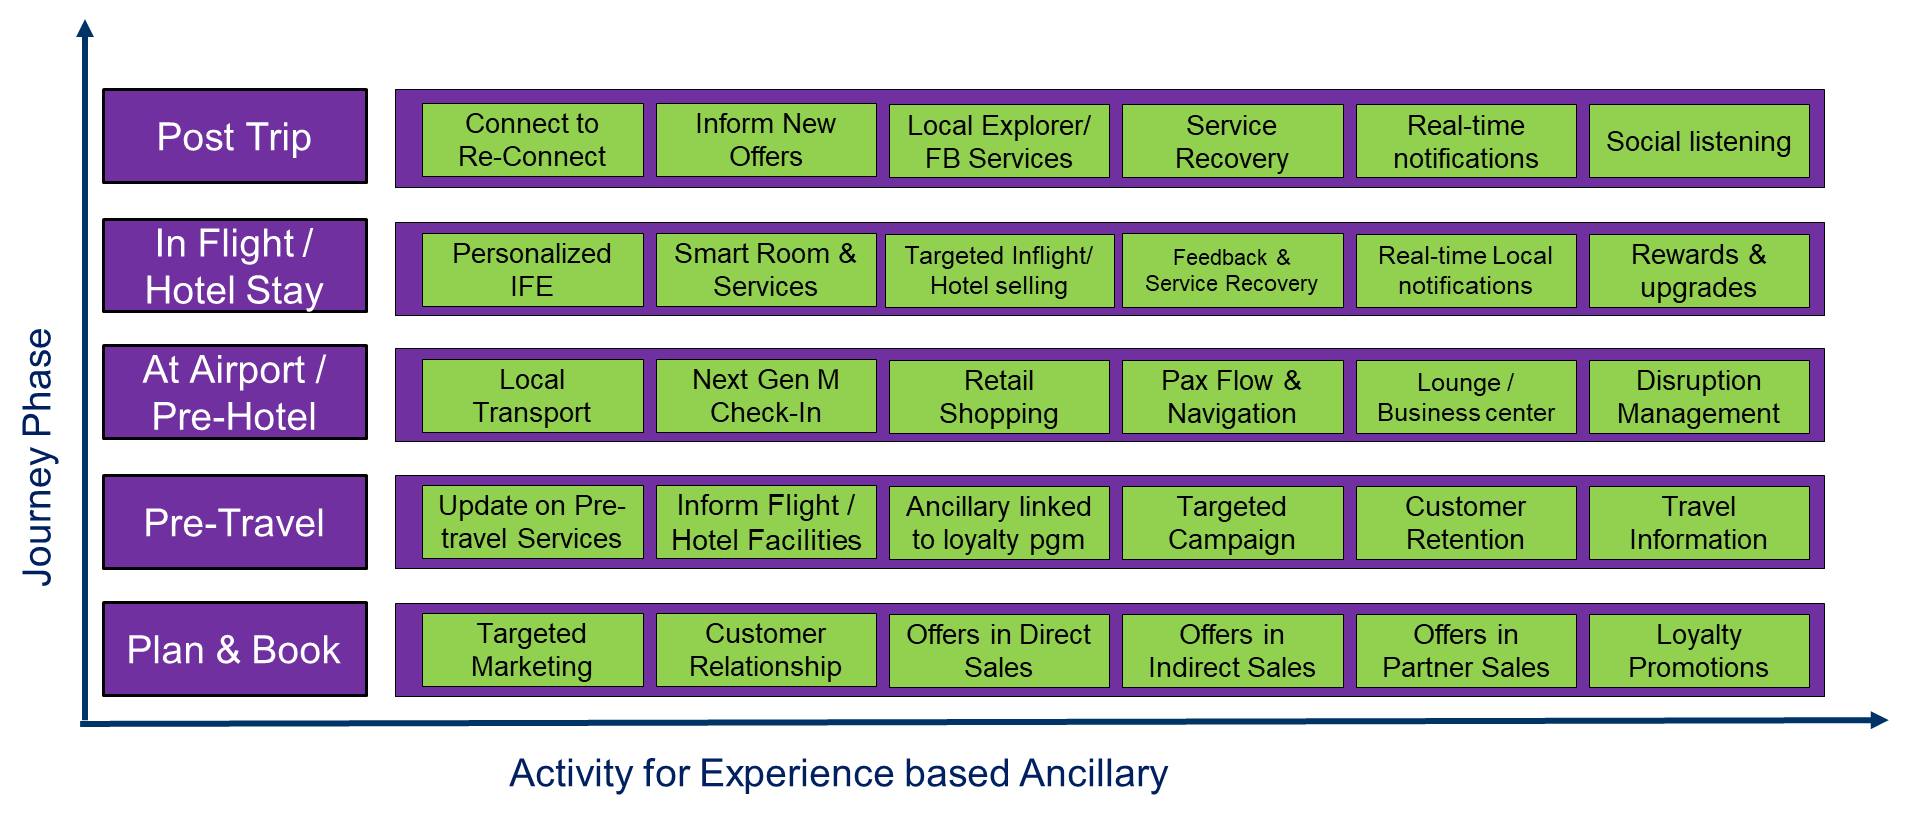 A sample matrix between Journey Phase and Activities